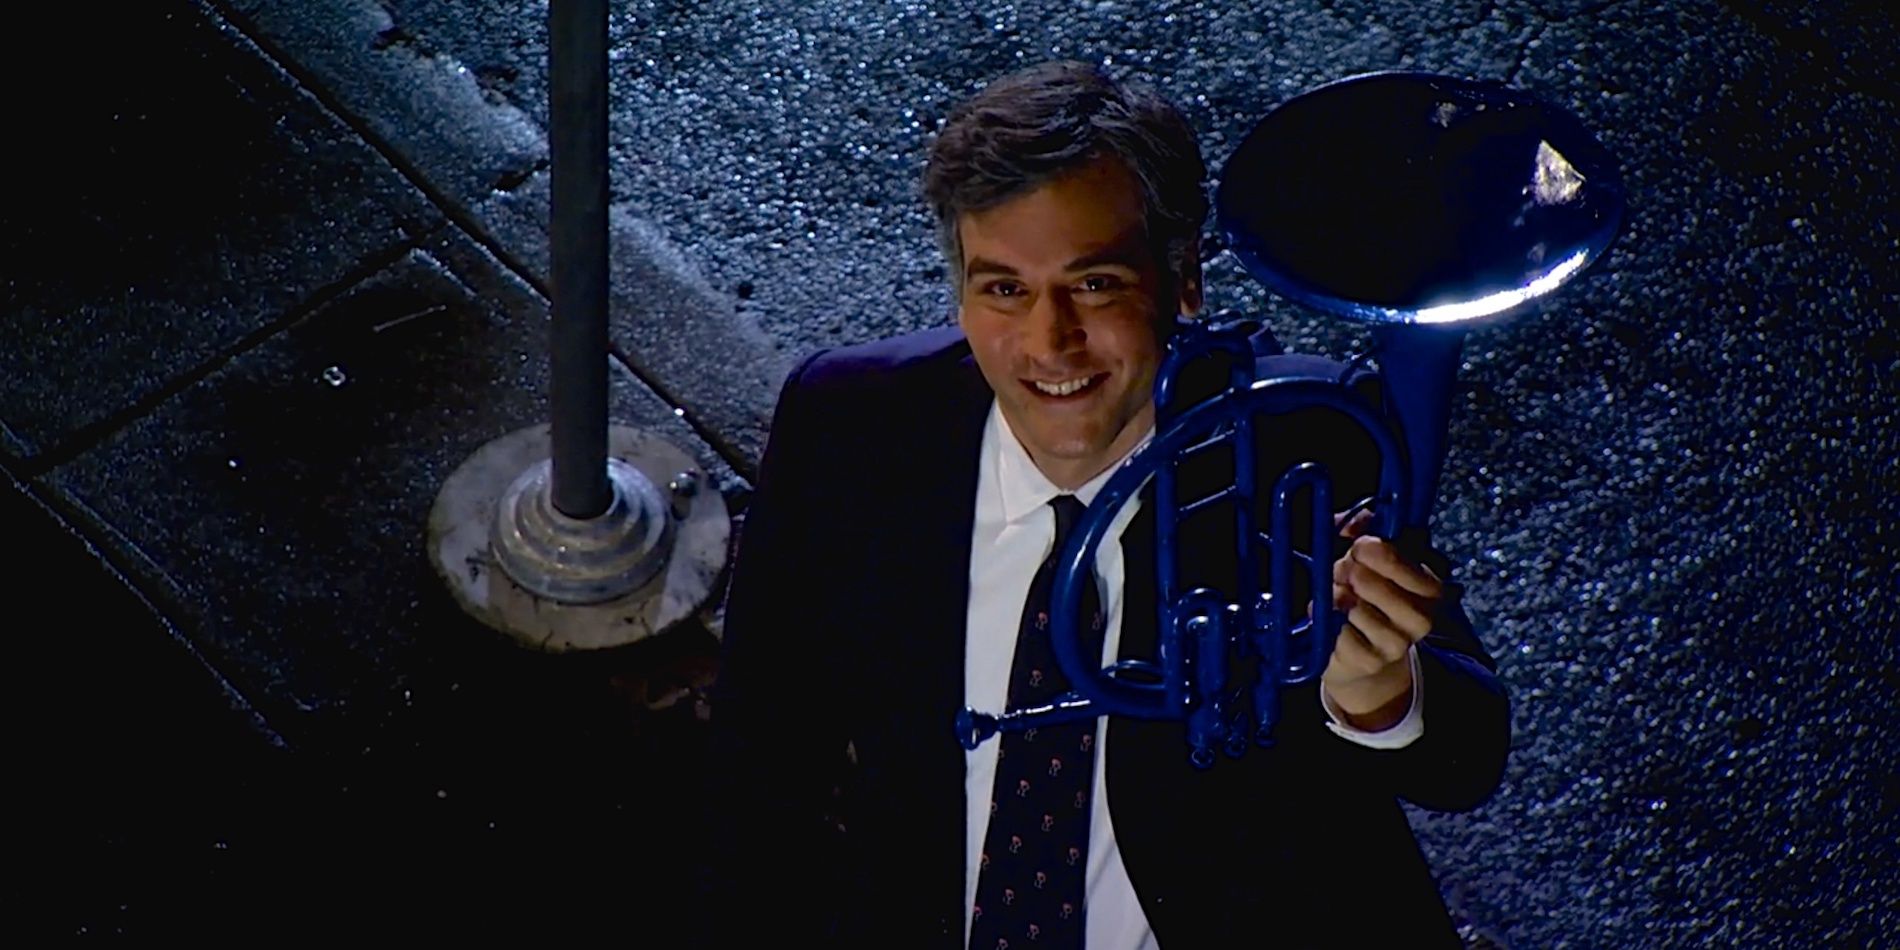 Ted holding the blue french horn in How I Met Your Mother.